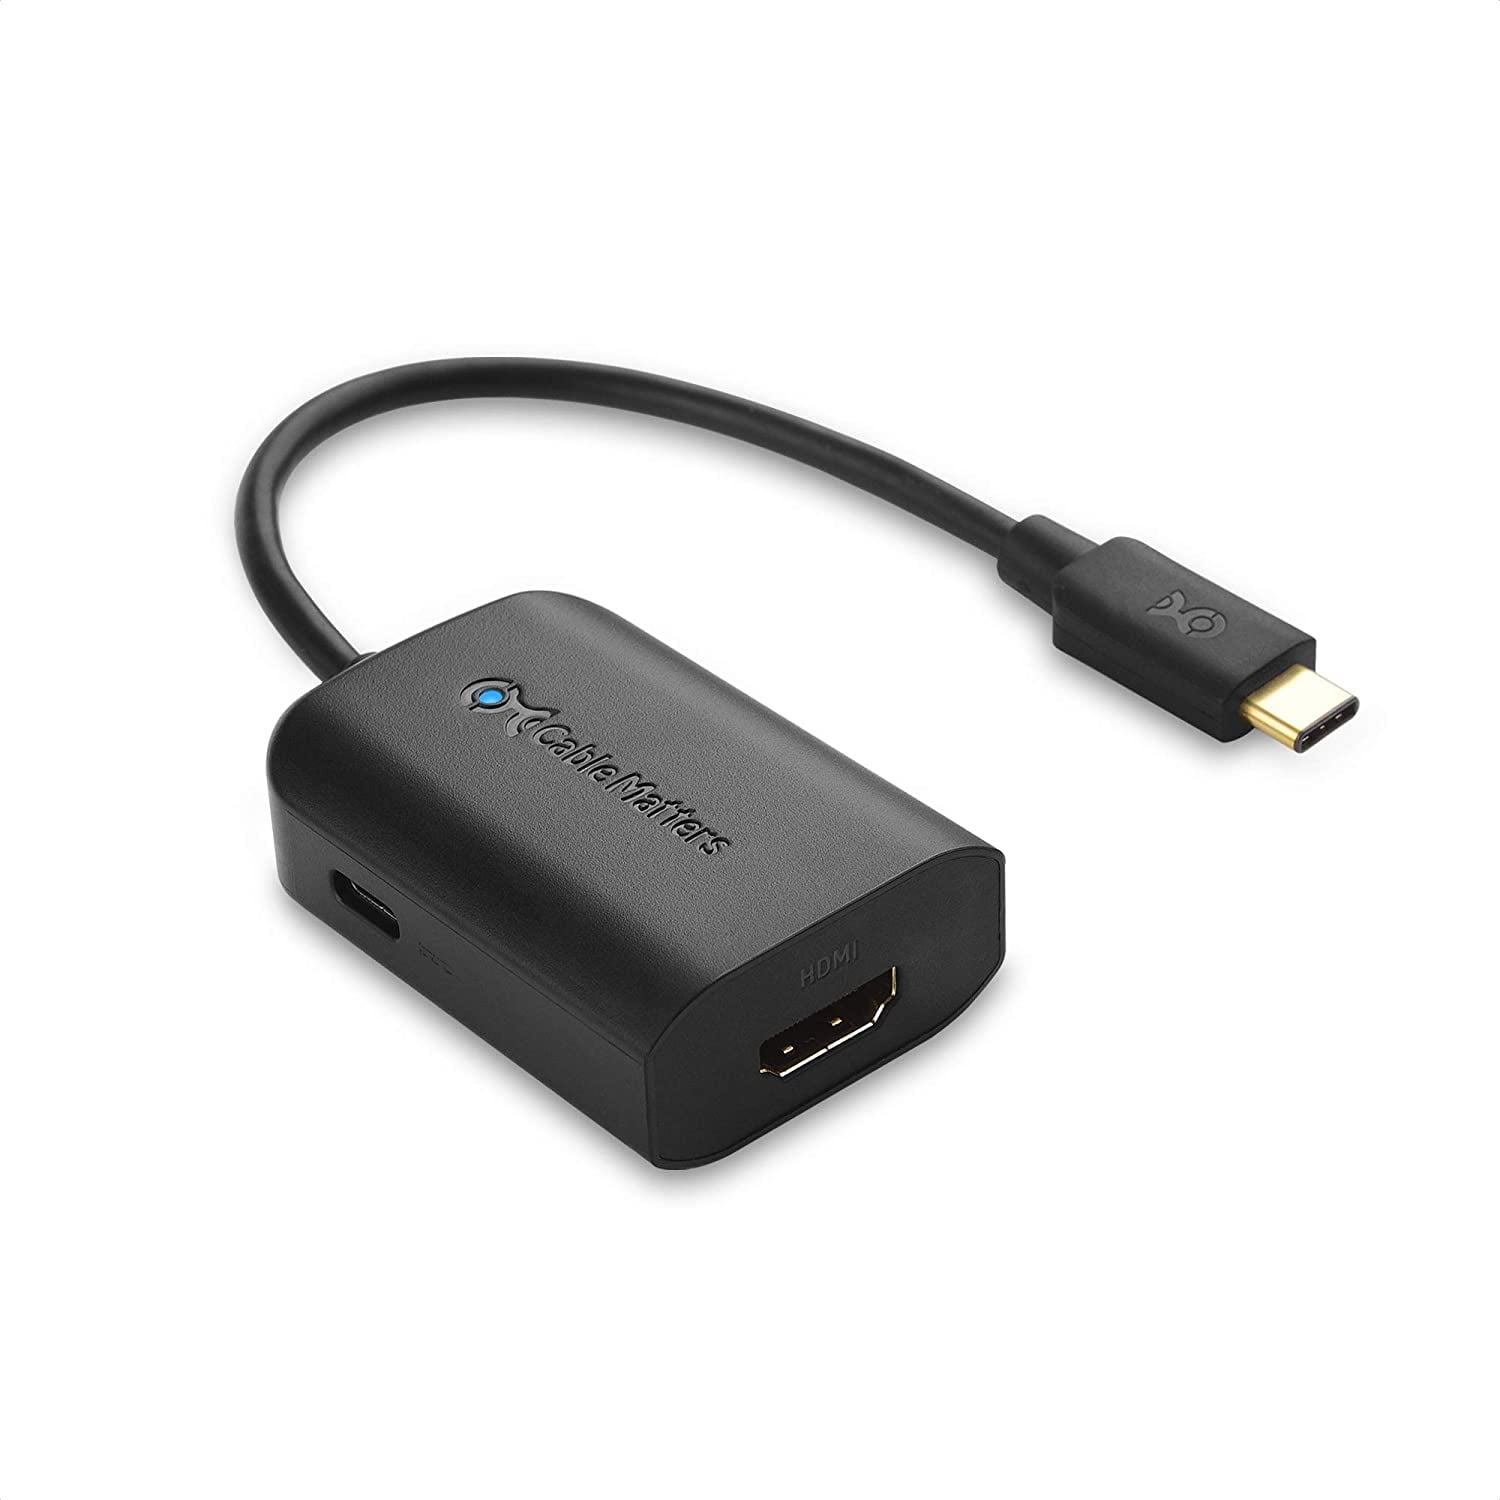 Cable Matters USB C to USB C Monitor Cable 6 ft 100W Power Delivery 1.8m with 4K 60Hz Video Resolution and 5Gbps USB-C 3.1 Gen 1 Data Transfer